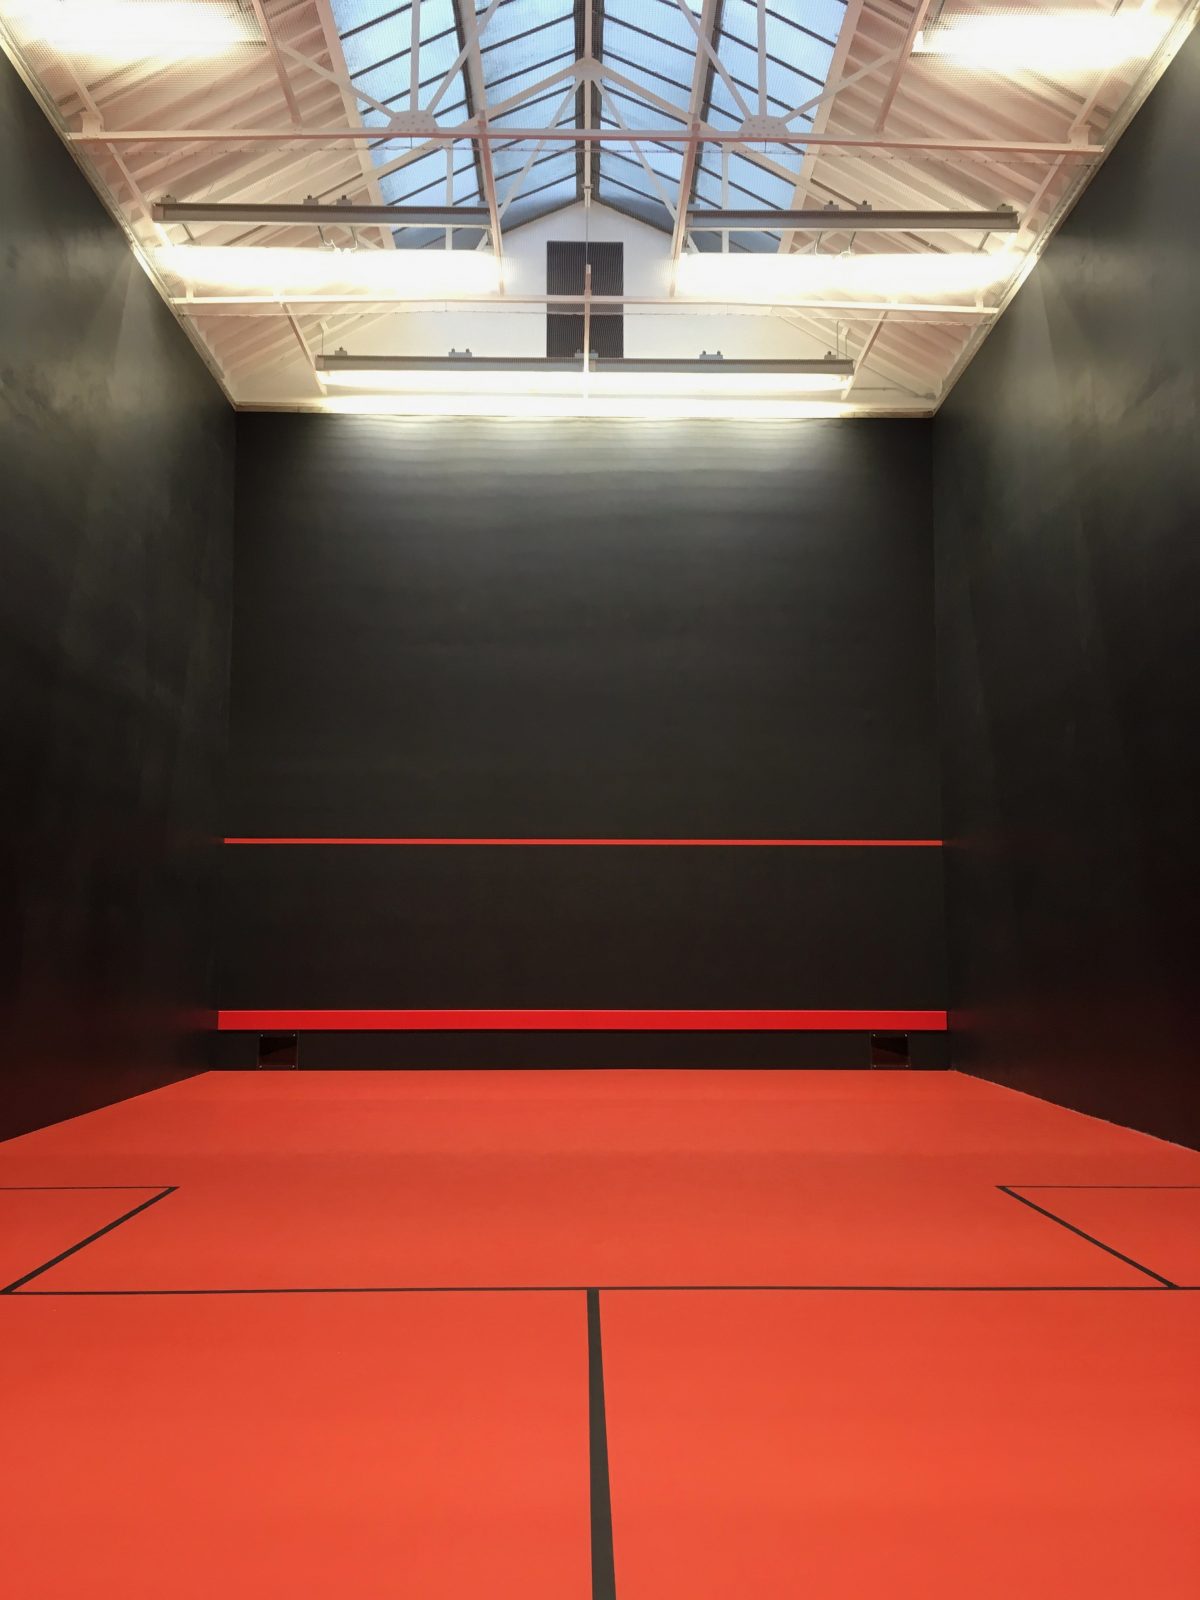 A rackets curt in London designed by Marcus Beale Architects